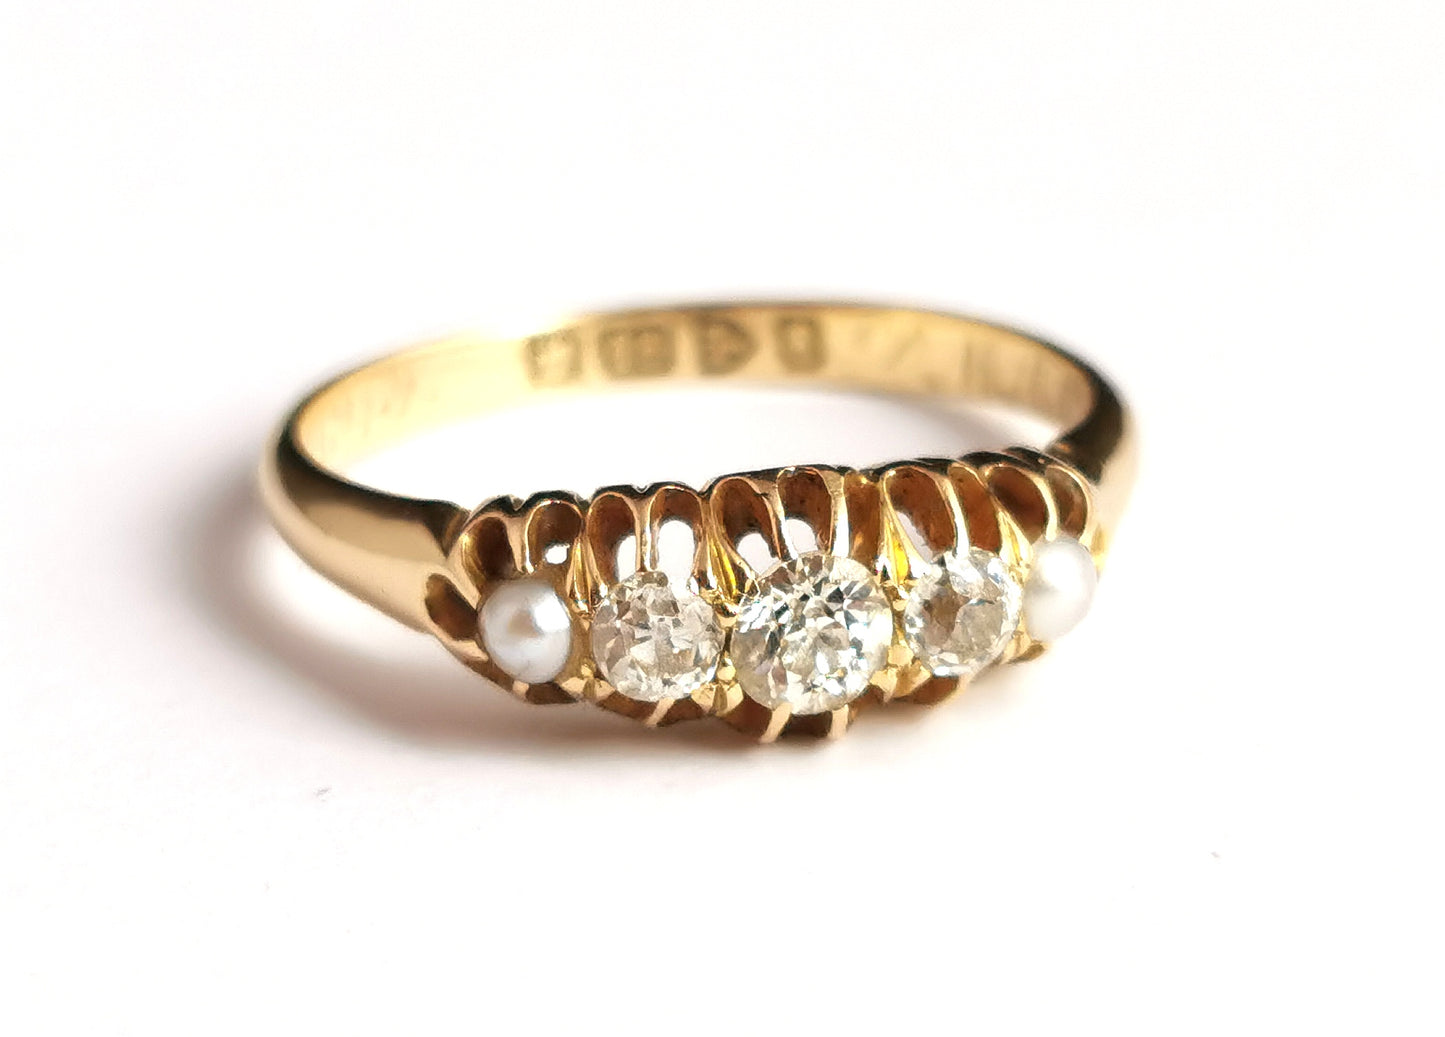 Antique diamond and pearl ring, 18ct gold, Edwardian